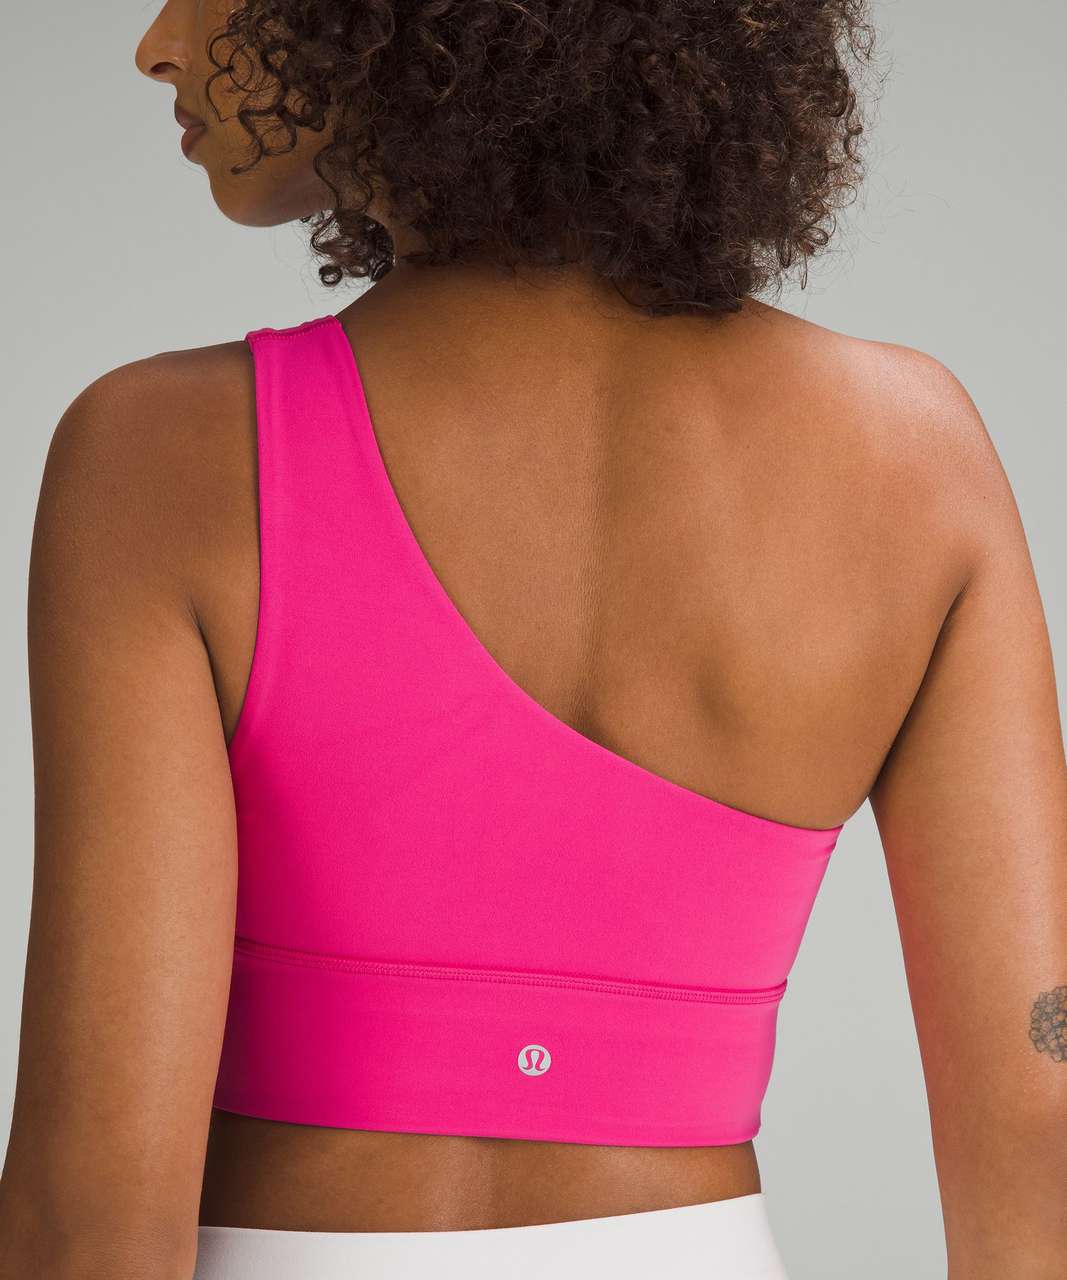 obsessed with the @lululemon align asymmetrical bra (c/d cup